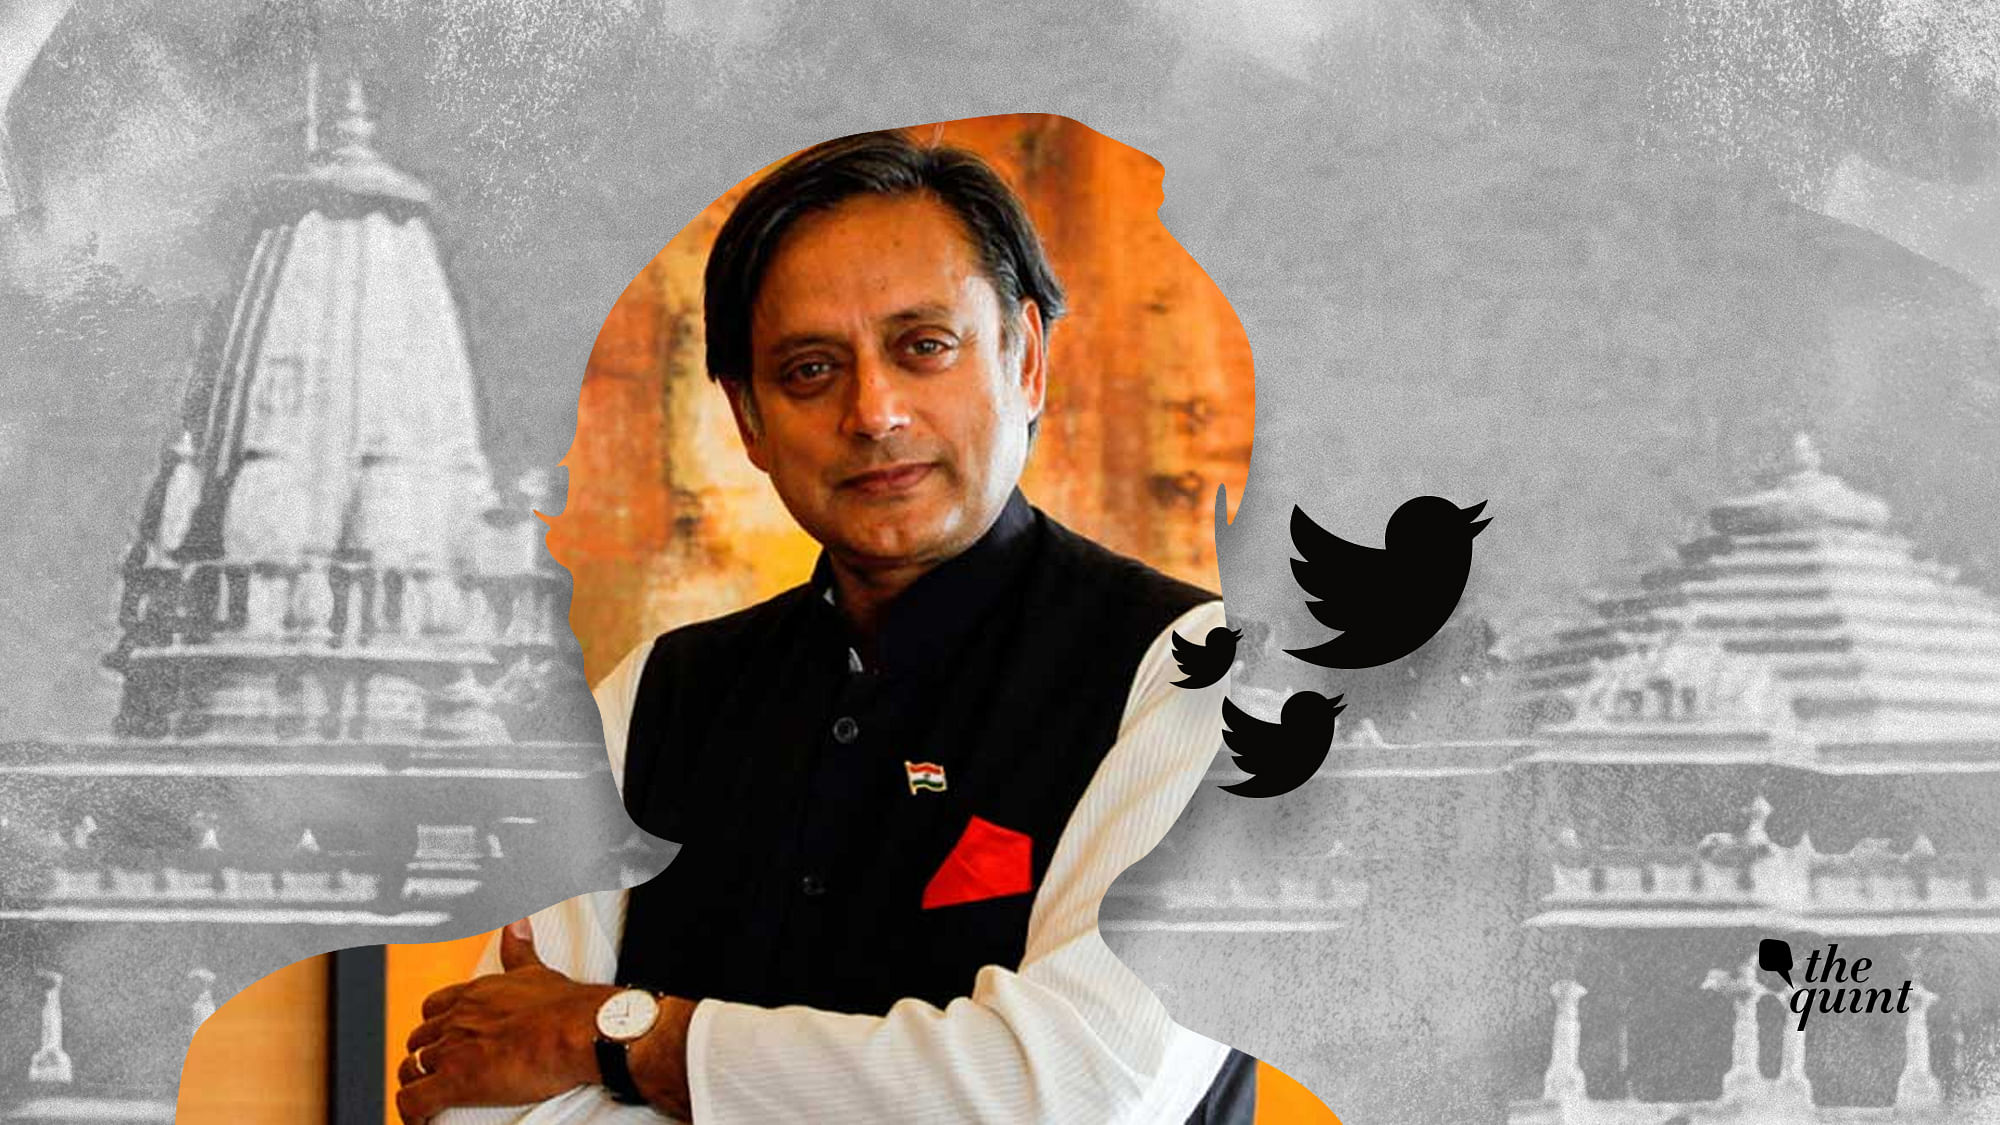 Congress MP Shashi Tharoor has been forced to clarify his stance, after being labelled ‘anti-Hindu’ by TV channels.